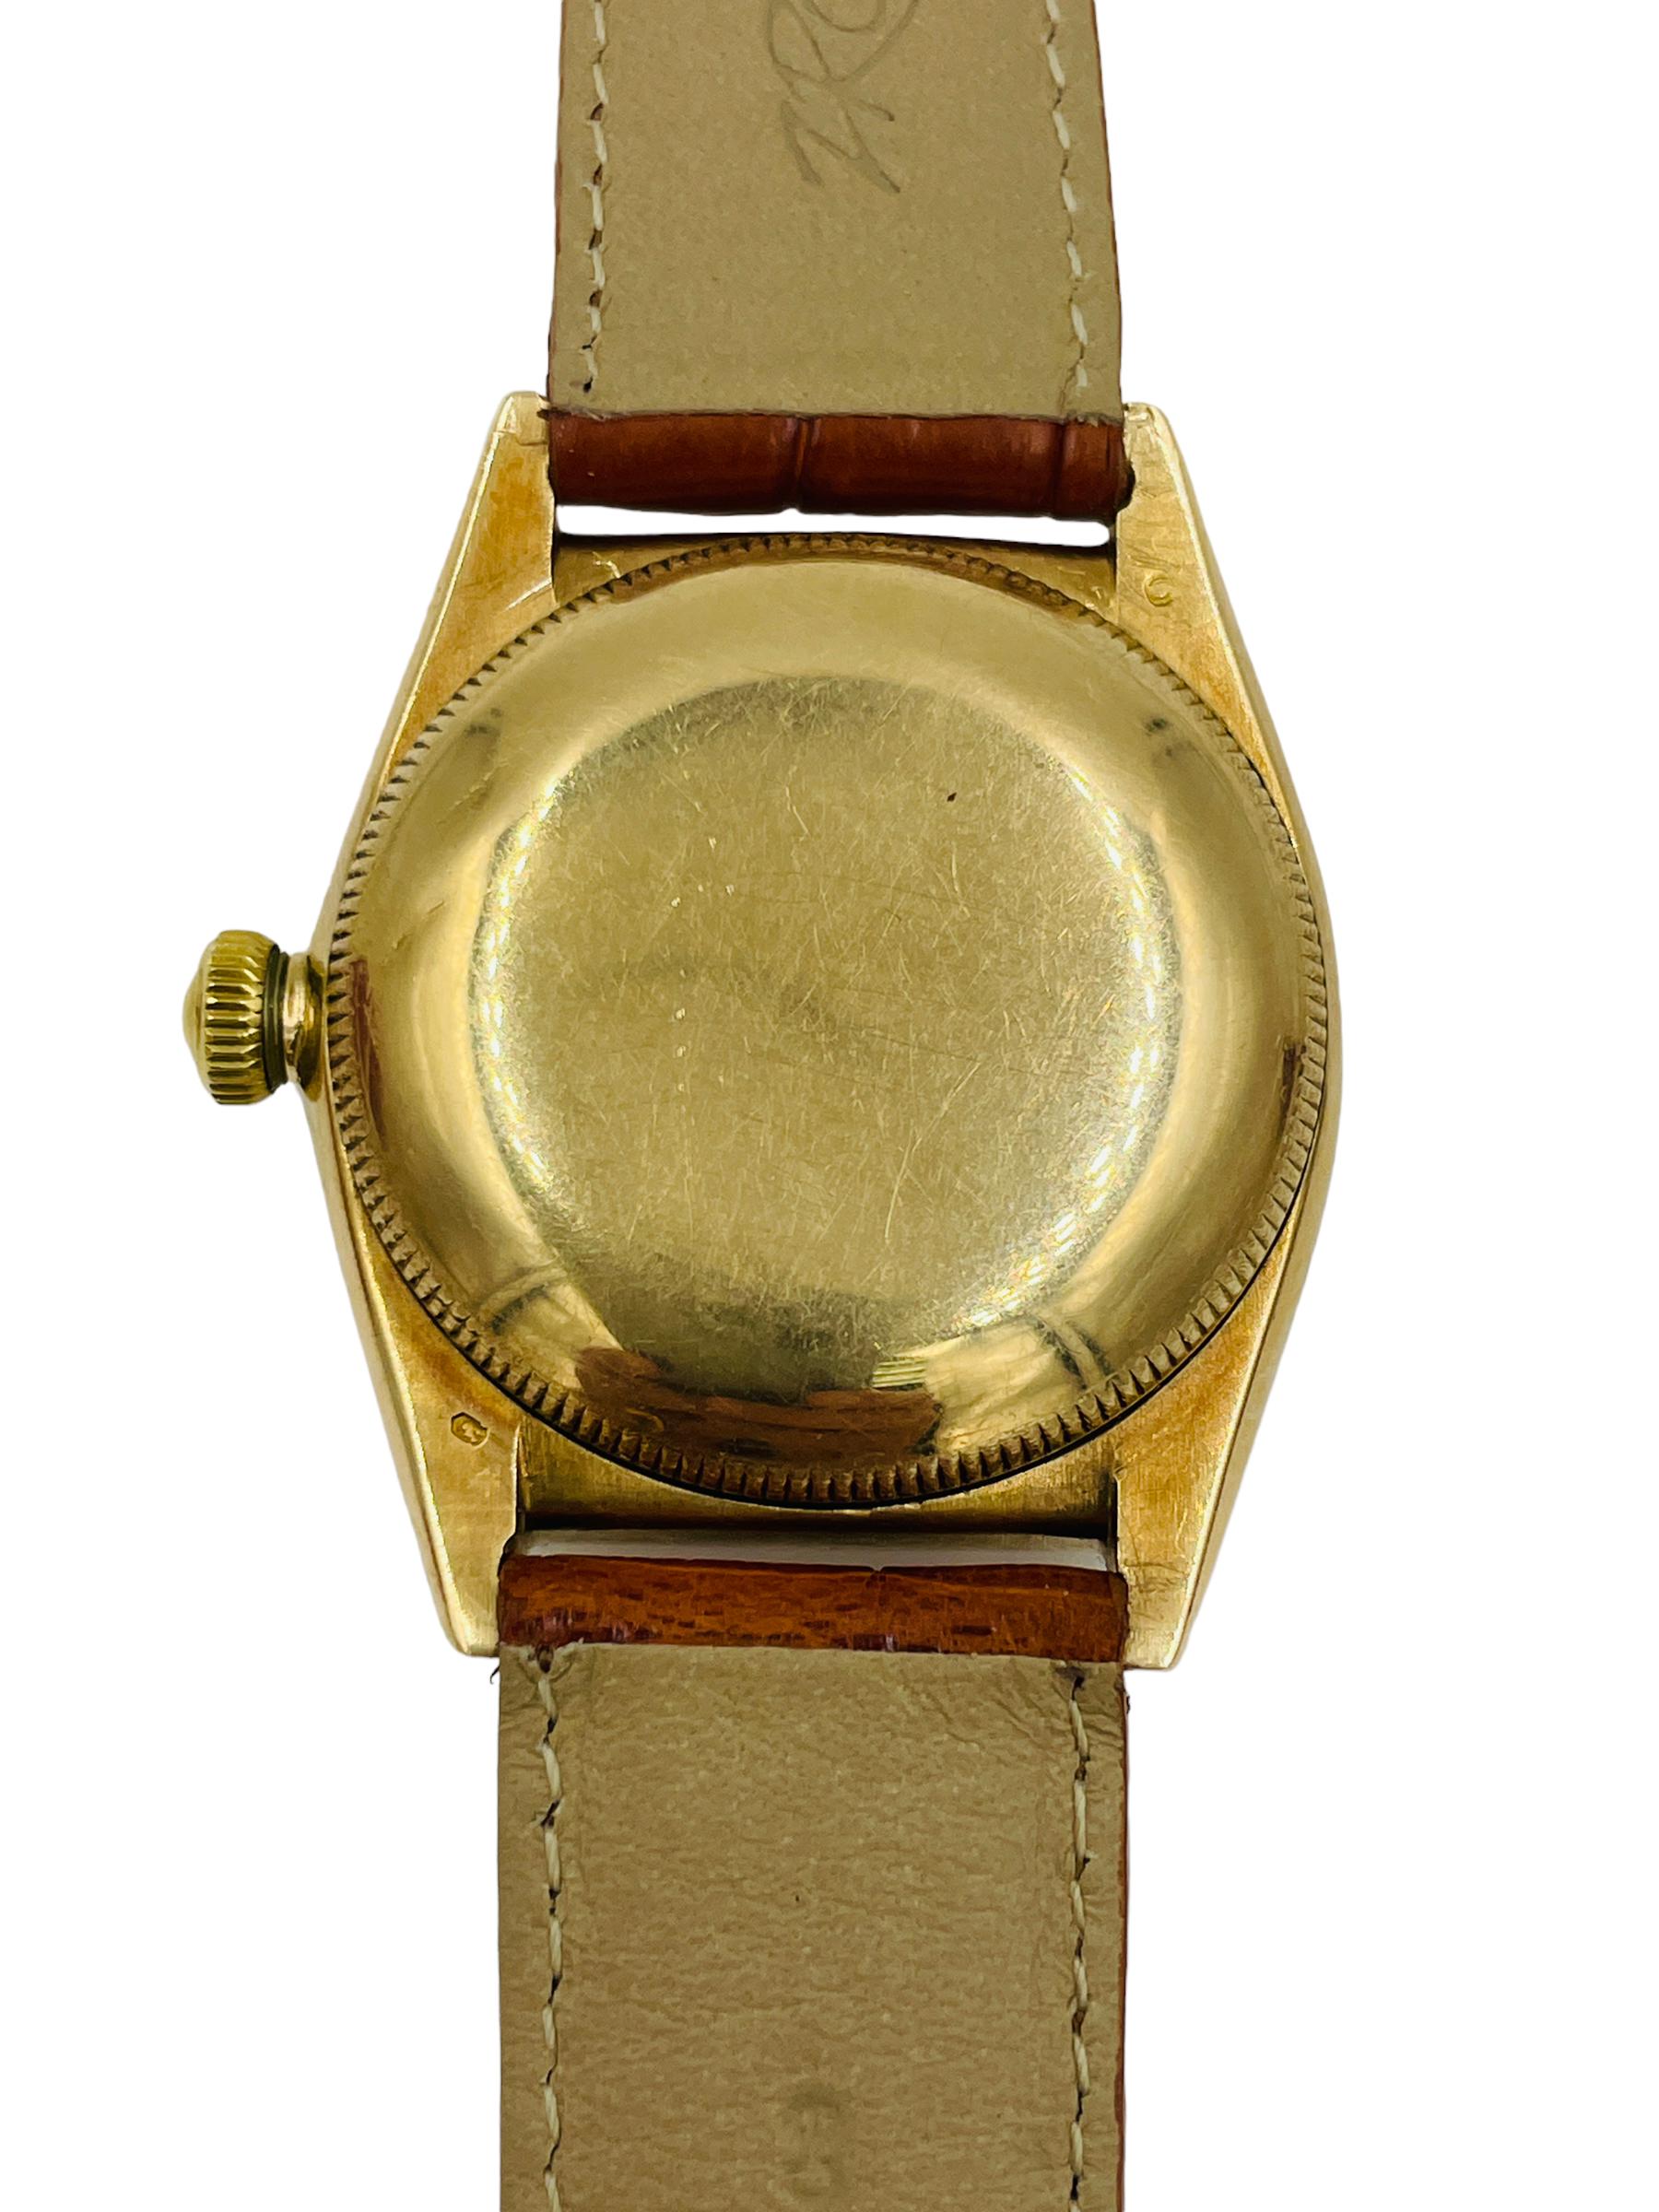 Vintage Rolex Yellow Gold Bubble Back Watch, circa 1947.

Vintage Rolex Bubbleback 14k gold ref: 3131 with new genuine Alligator leather strap. It's just been serviced running strong with no issues to note. Case size is 31mm with light scratches,